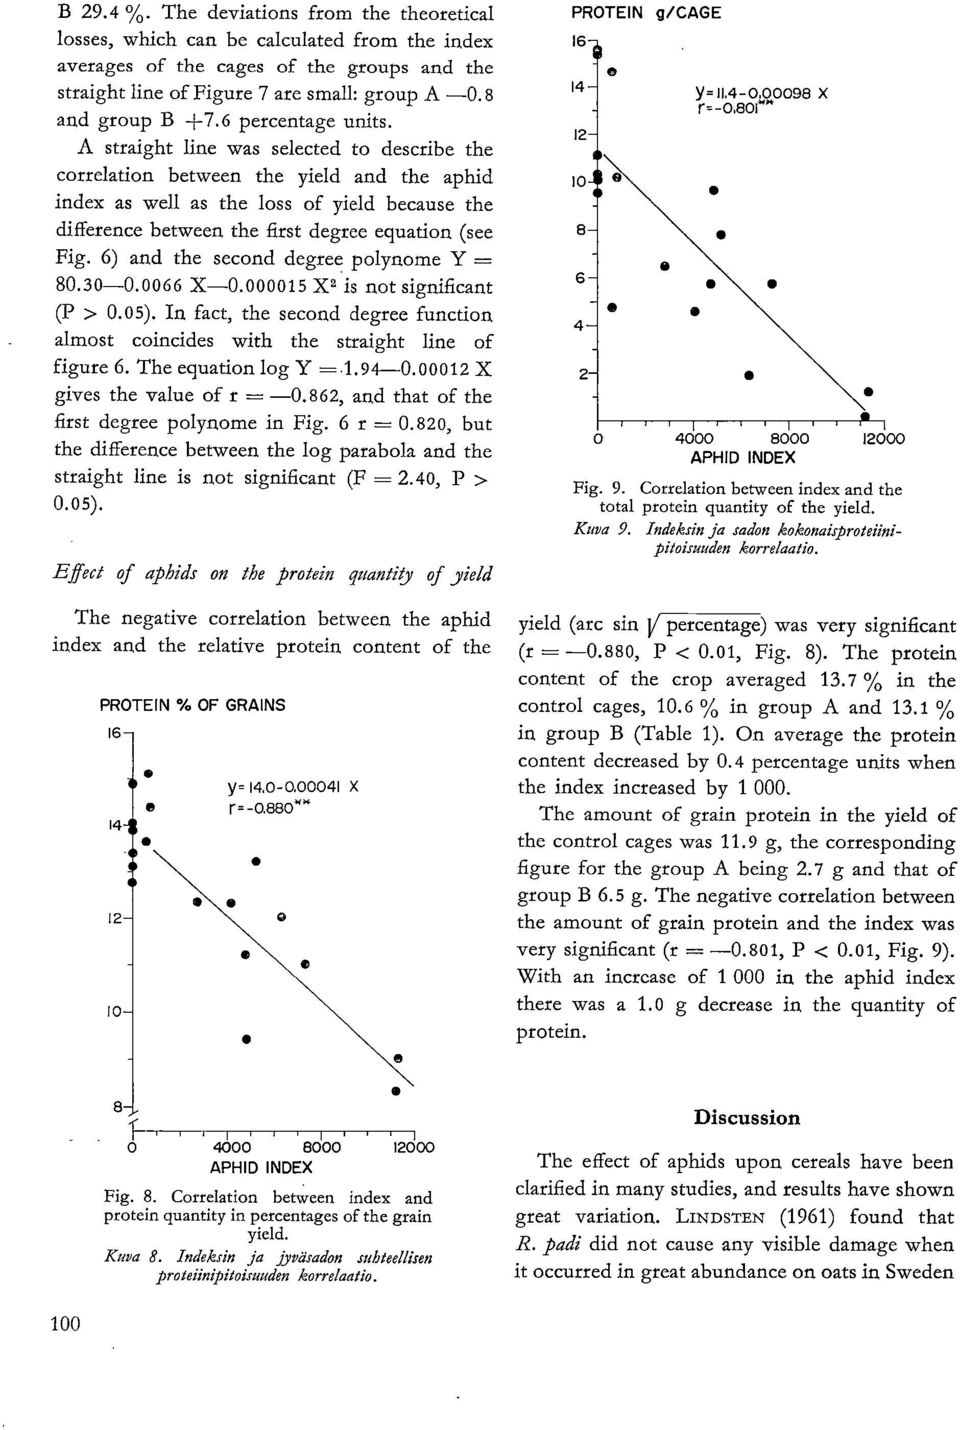 A straight line was selected to describe the correlation between the yield and the aphid index as well as the loss of yield because the difference between the first degree equation (see Fig.